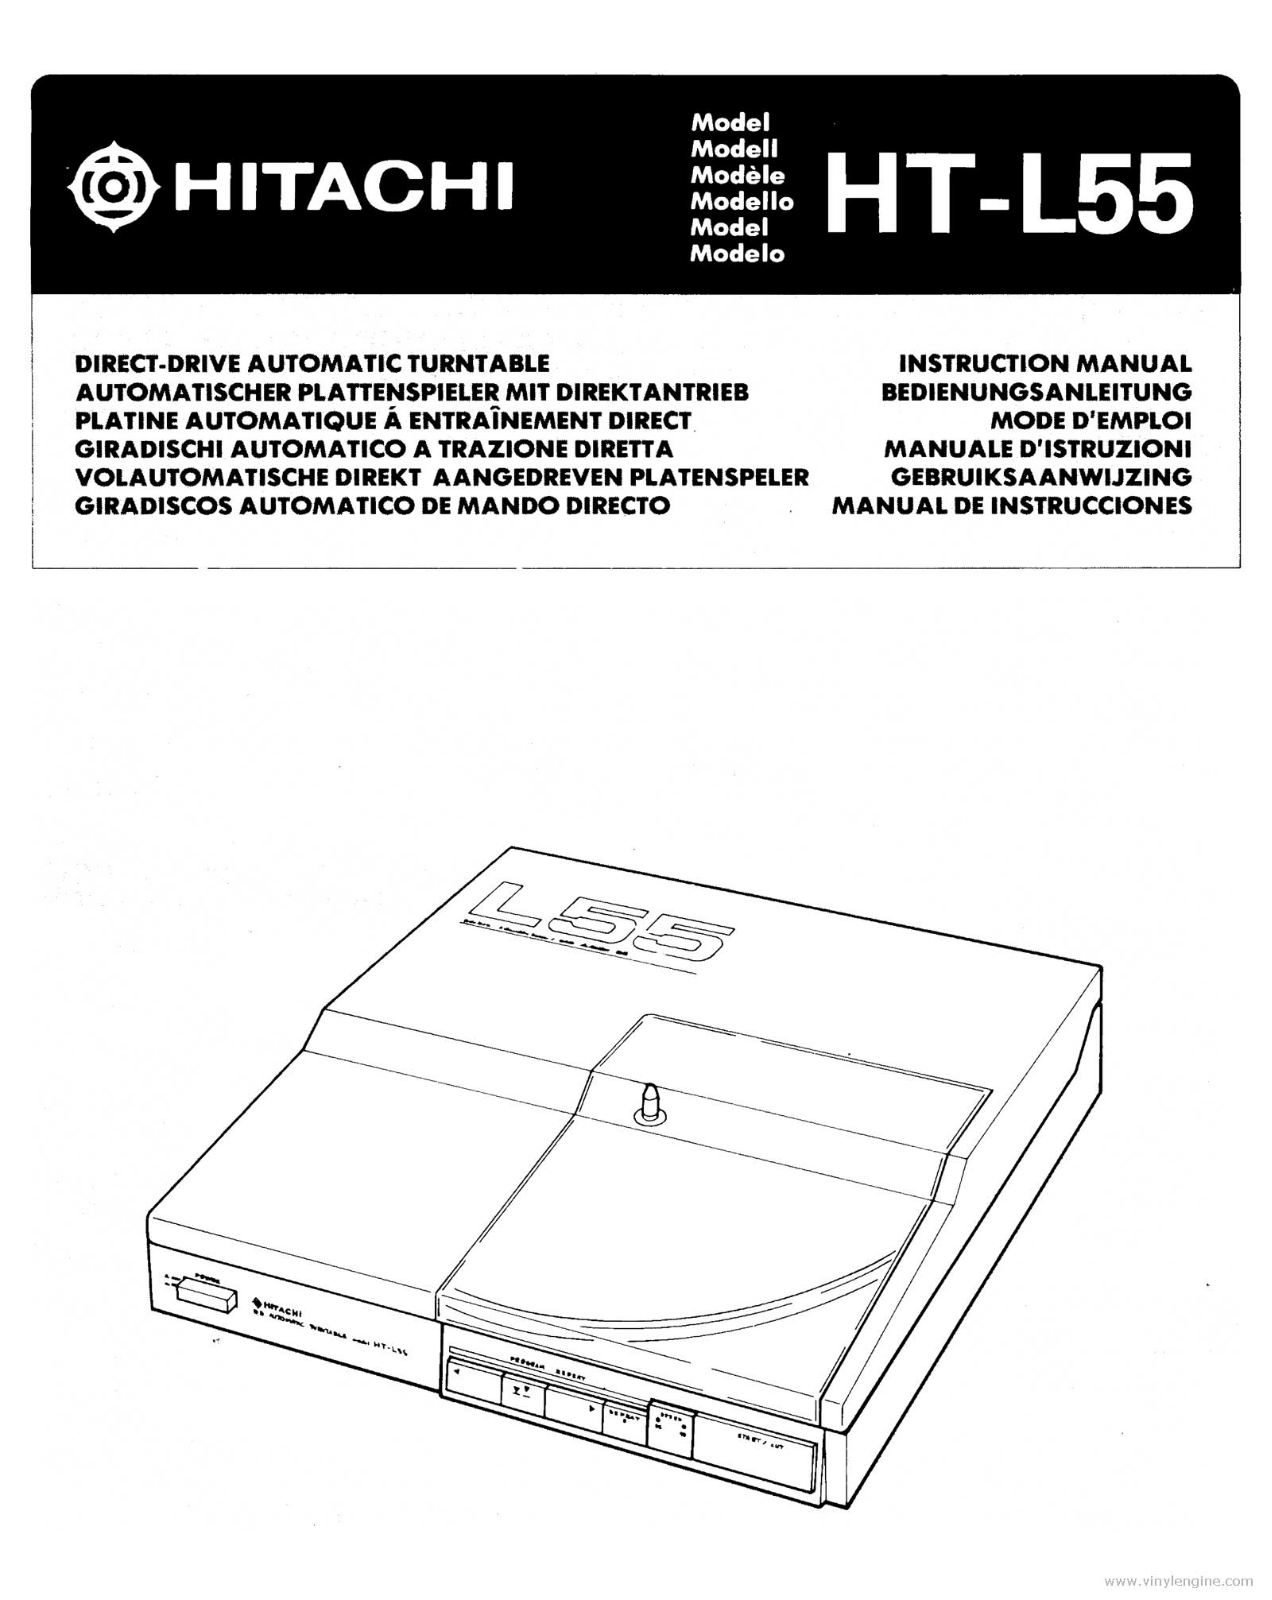 Hitachi HTL-55 Owners Manual